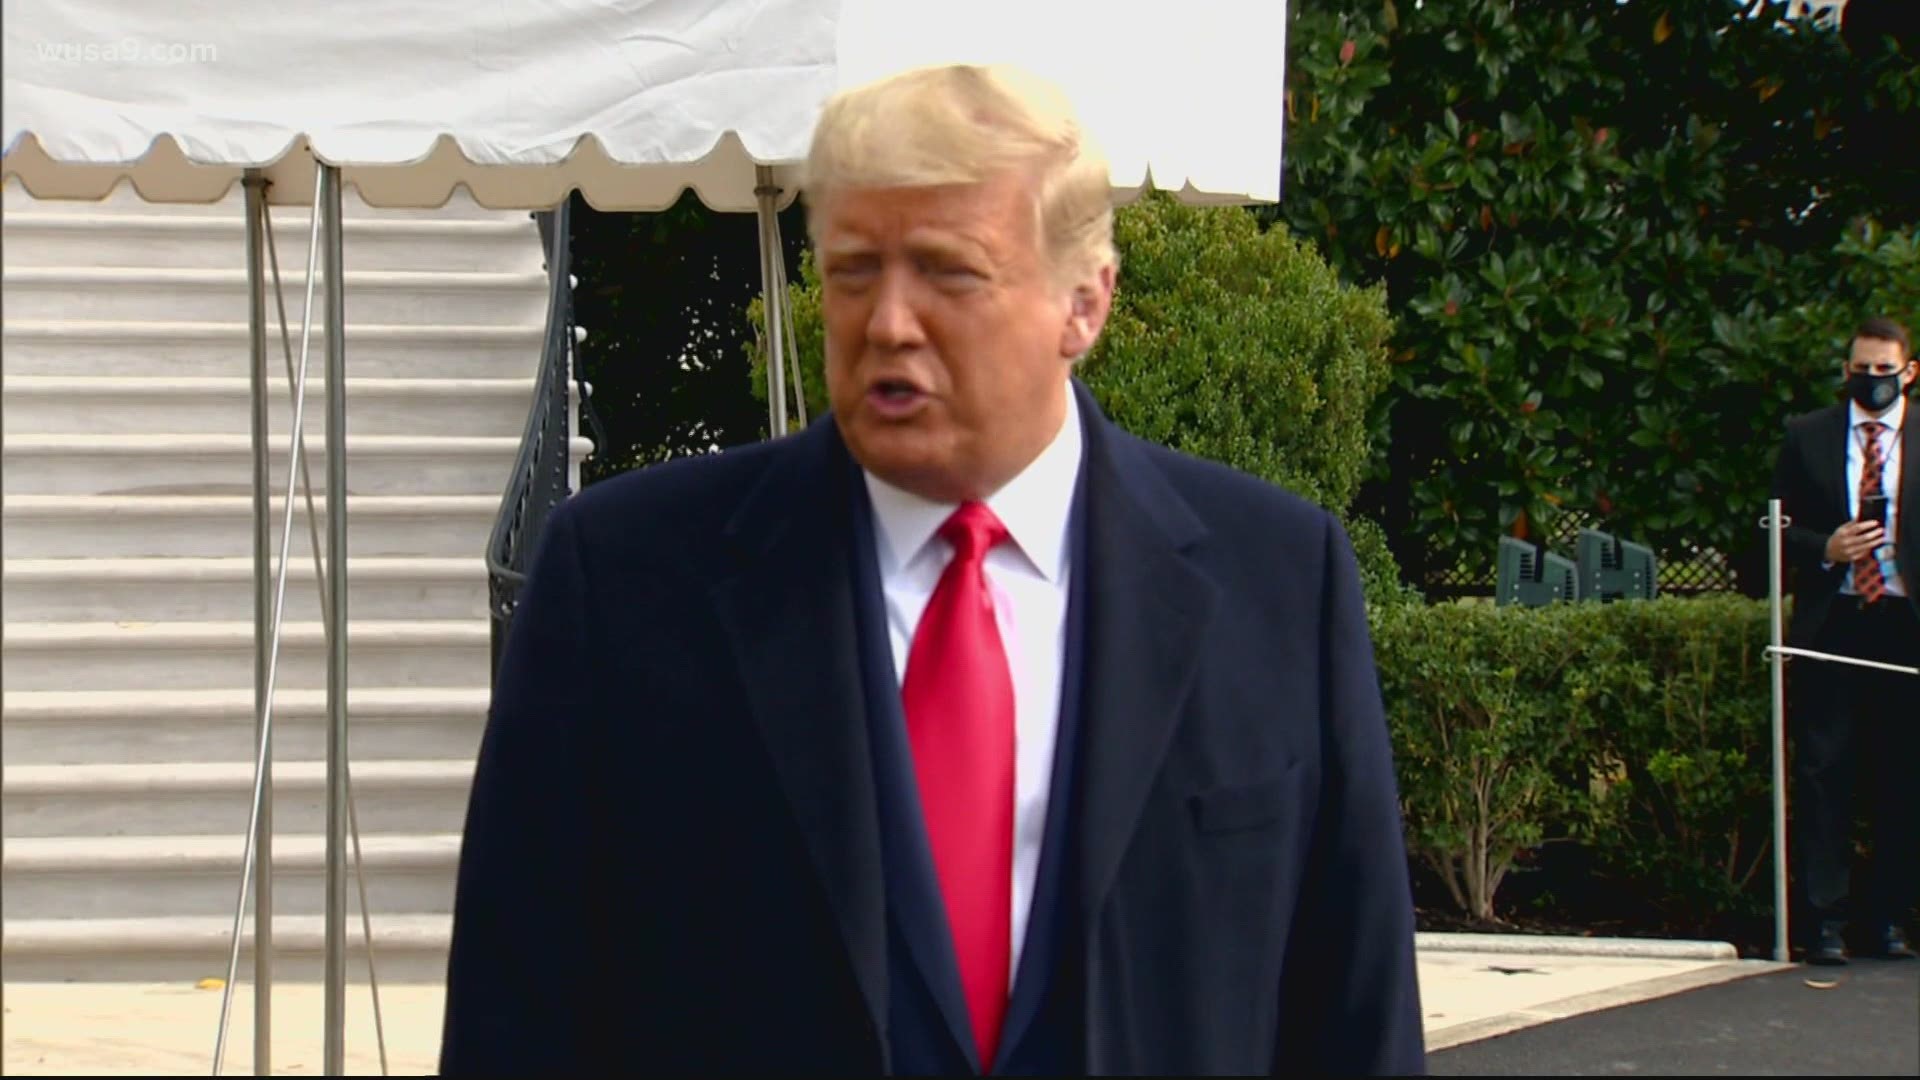 President Trump said Friday he’s not sure where he'll mark election night after DC officials signaled that a party planned at his hotel could violate COVID rules.